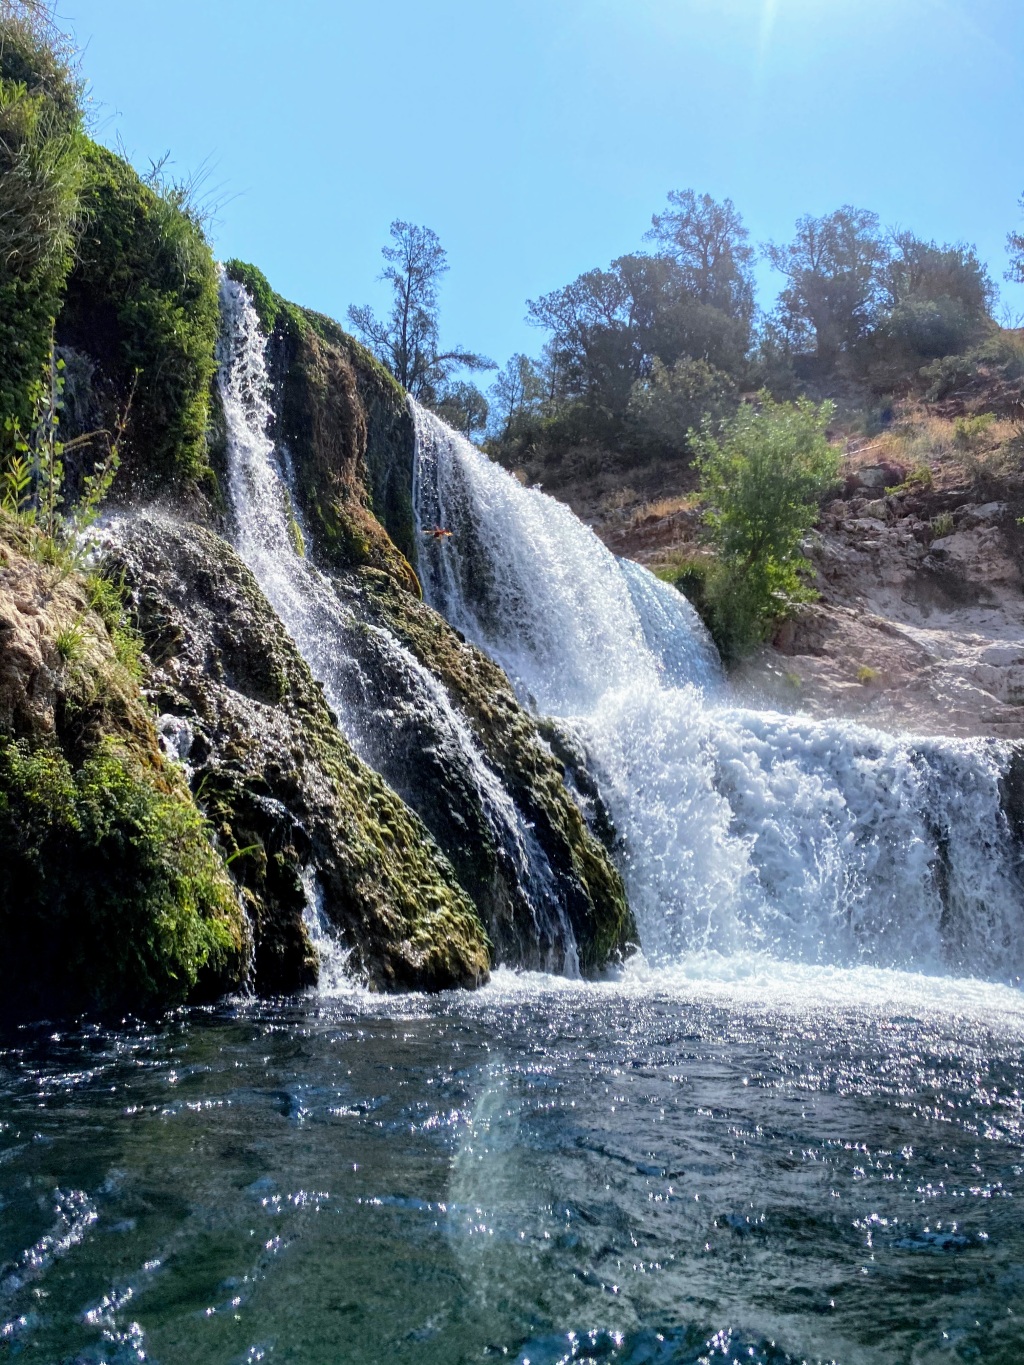 Day Trip to a Turquoise Waterfall at Fossil Springs in Arizona